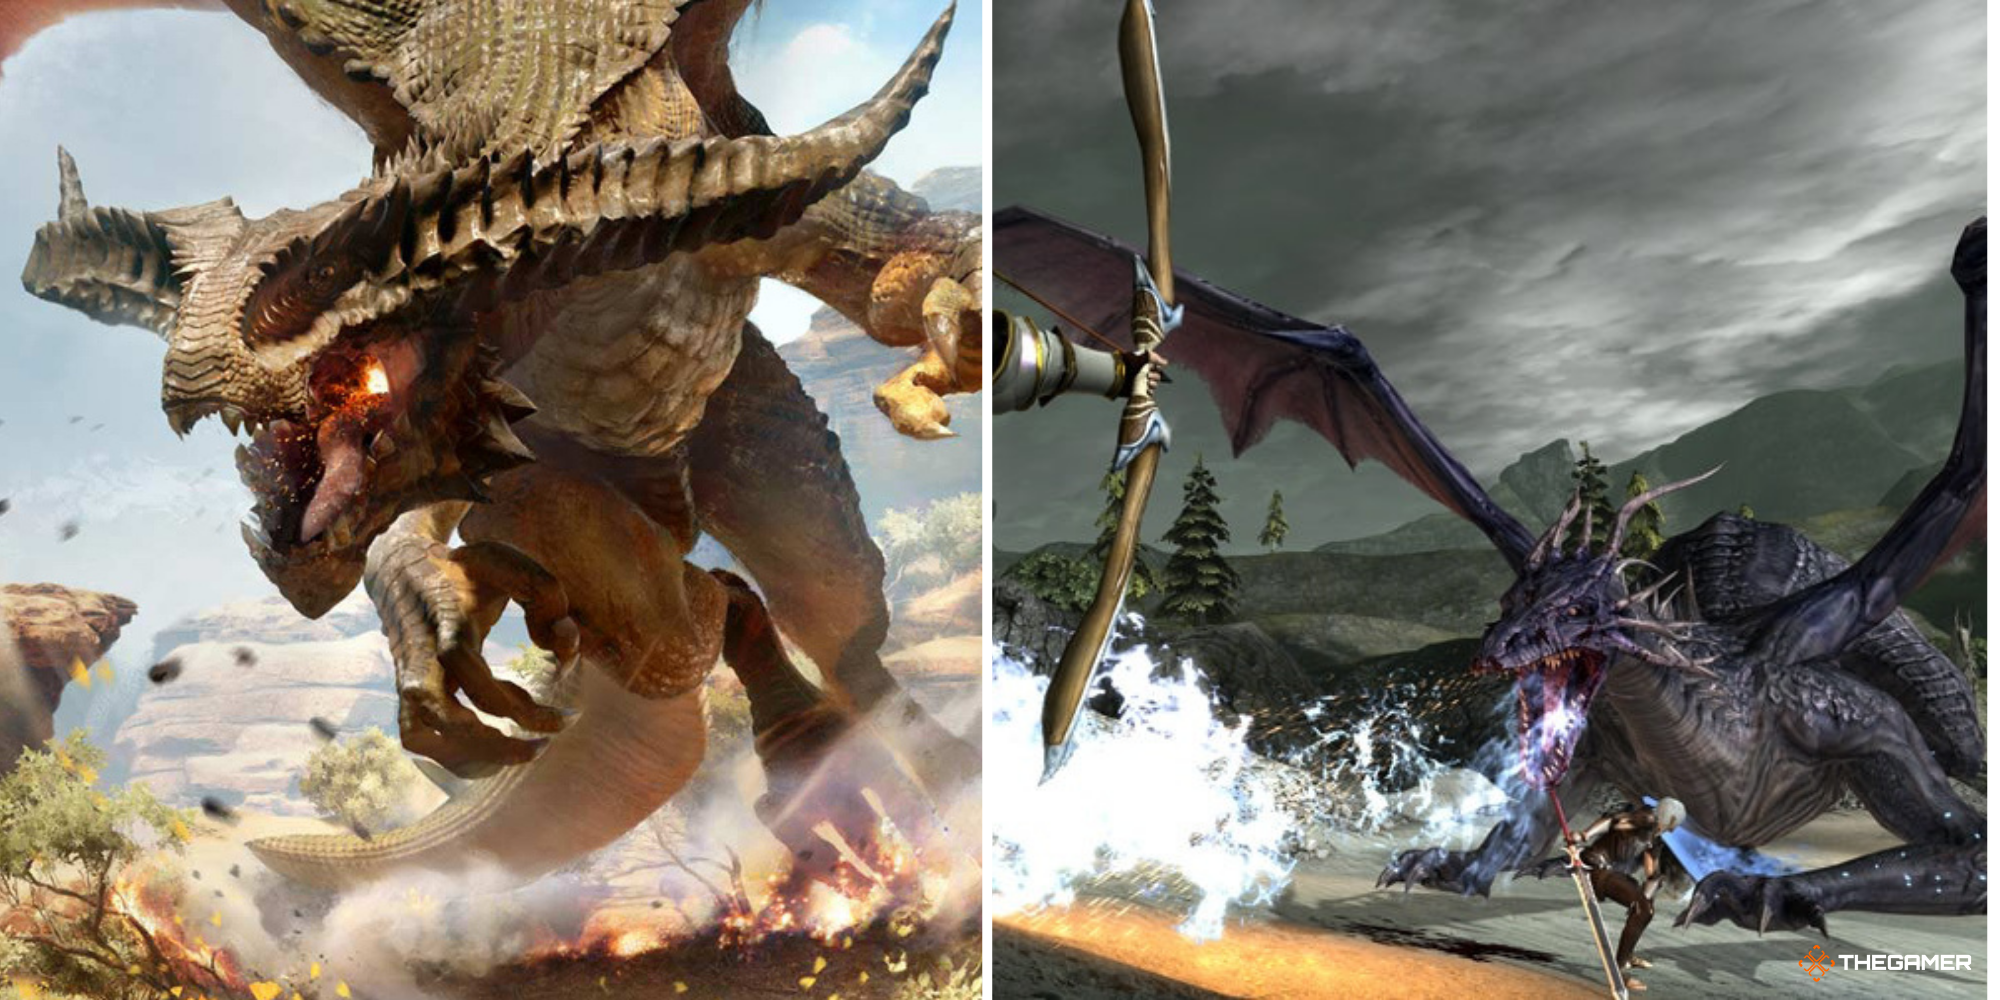 Dragon Age - fighting Dragons (Inquisition on left, 2 on right)